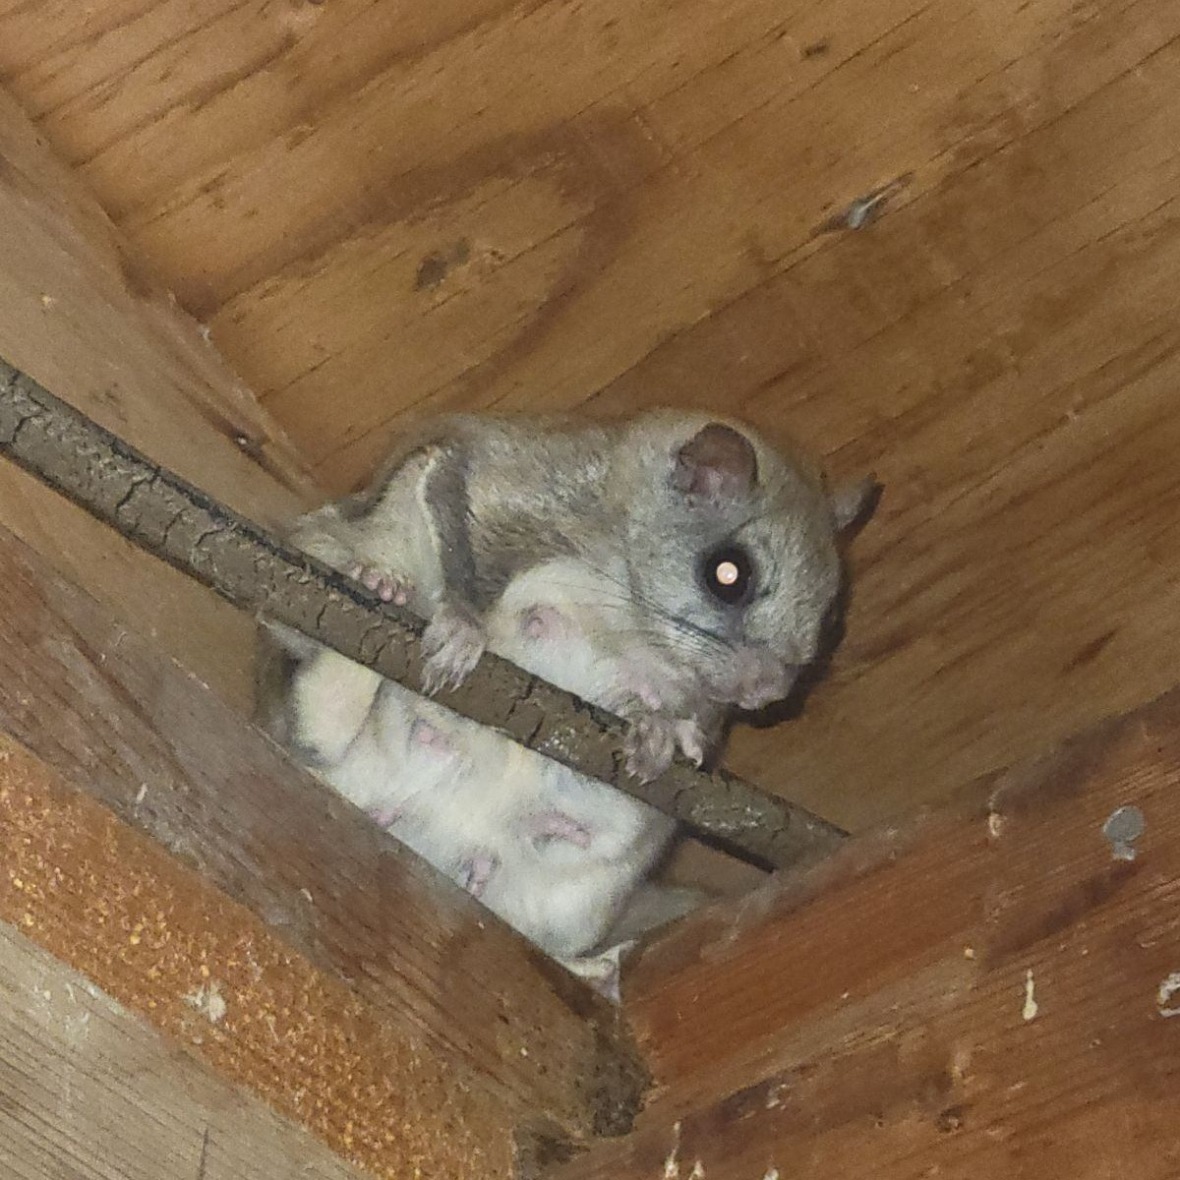 Surprise–a flying squirrel!